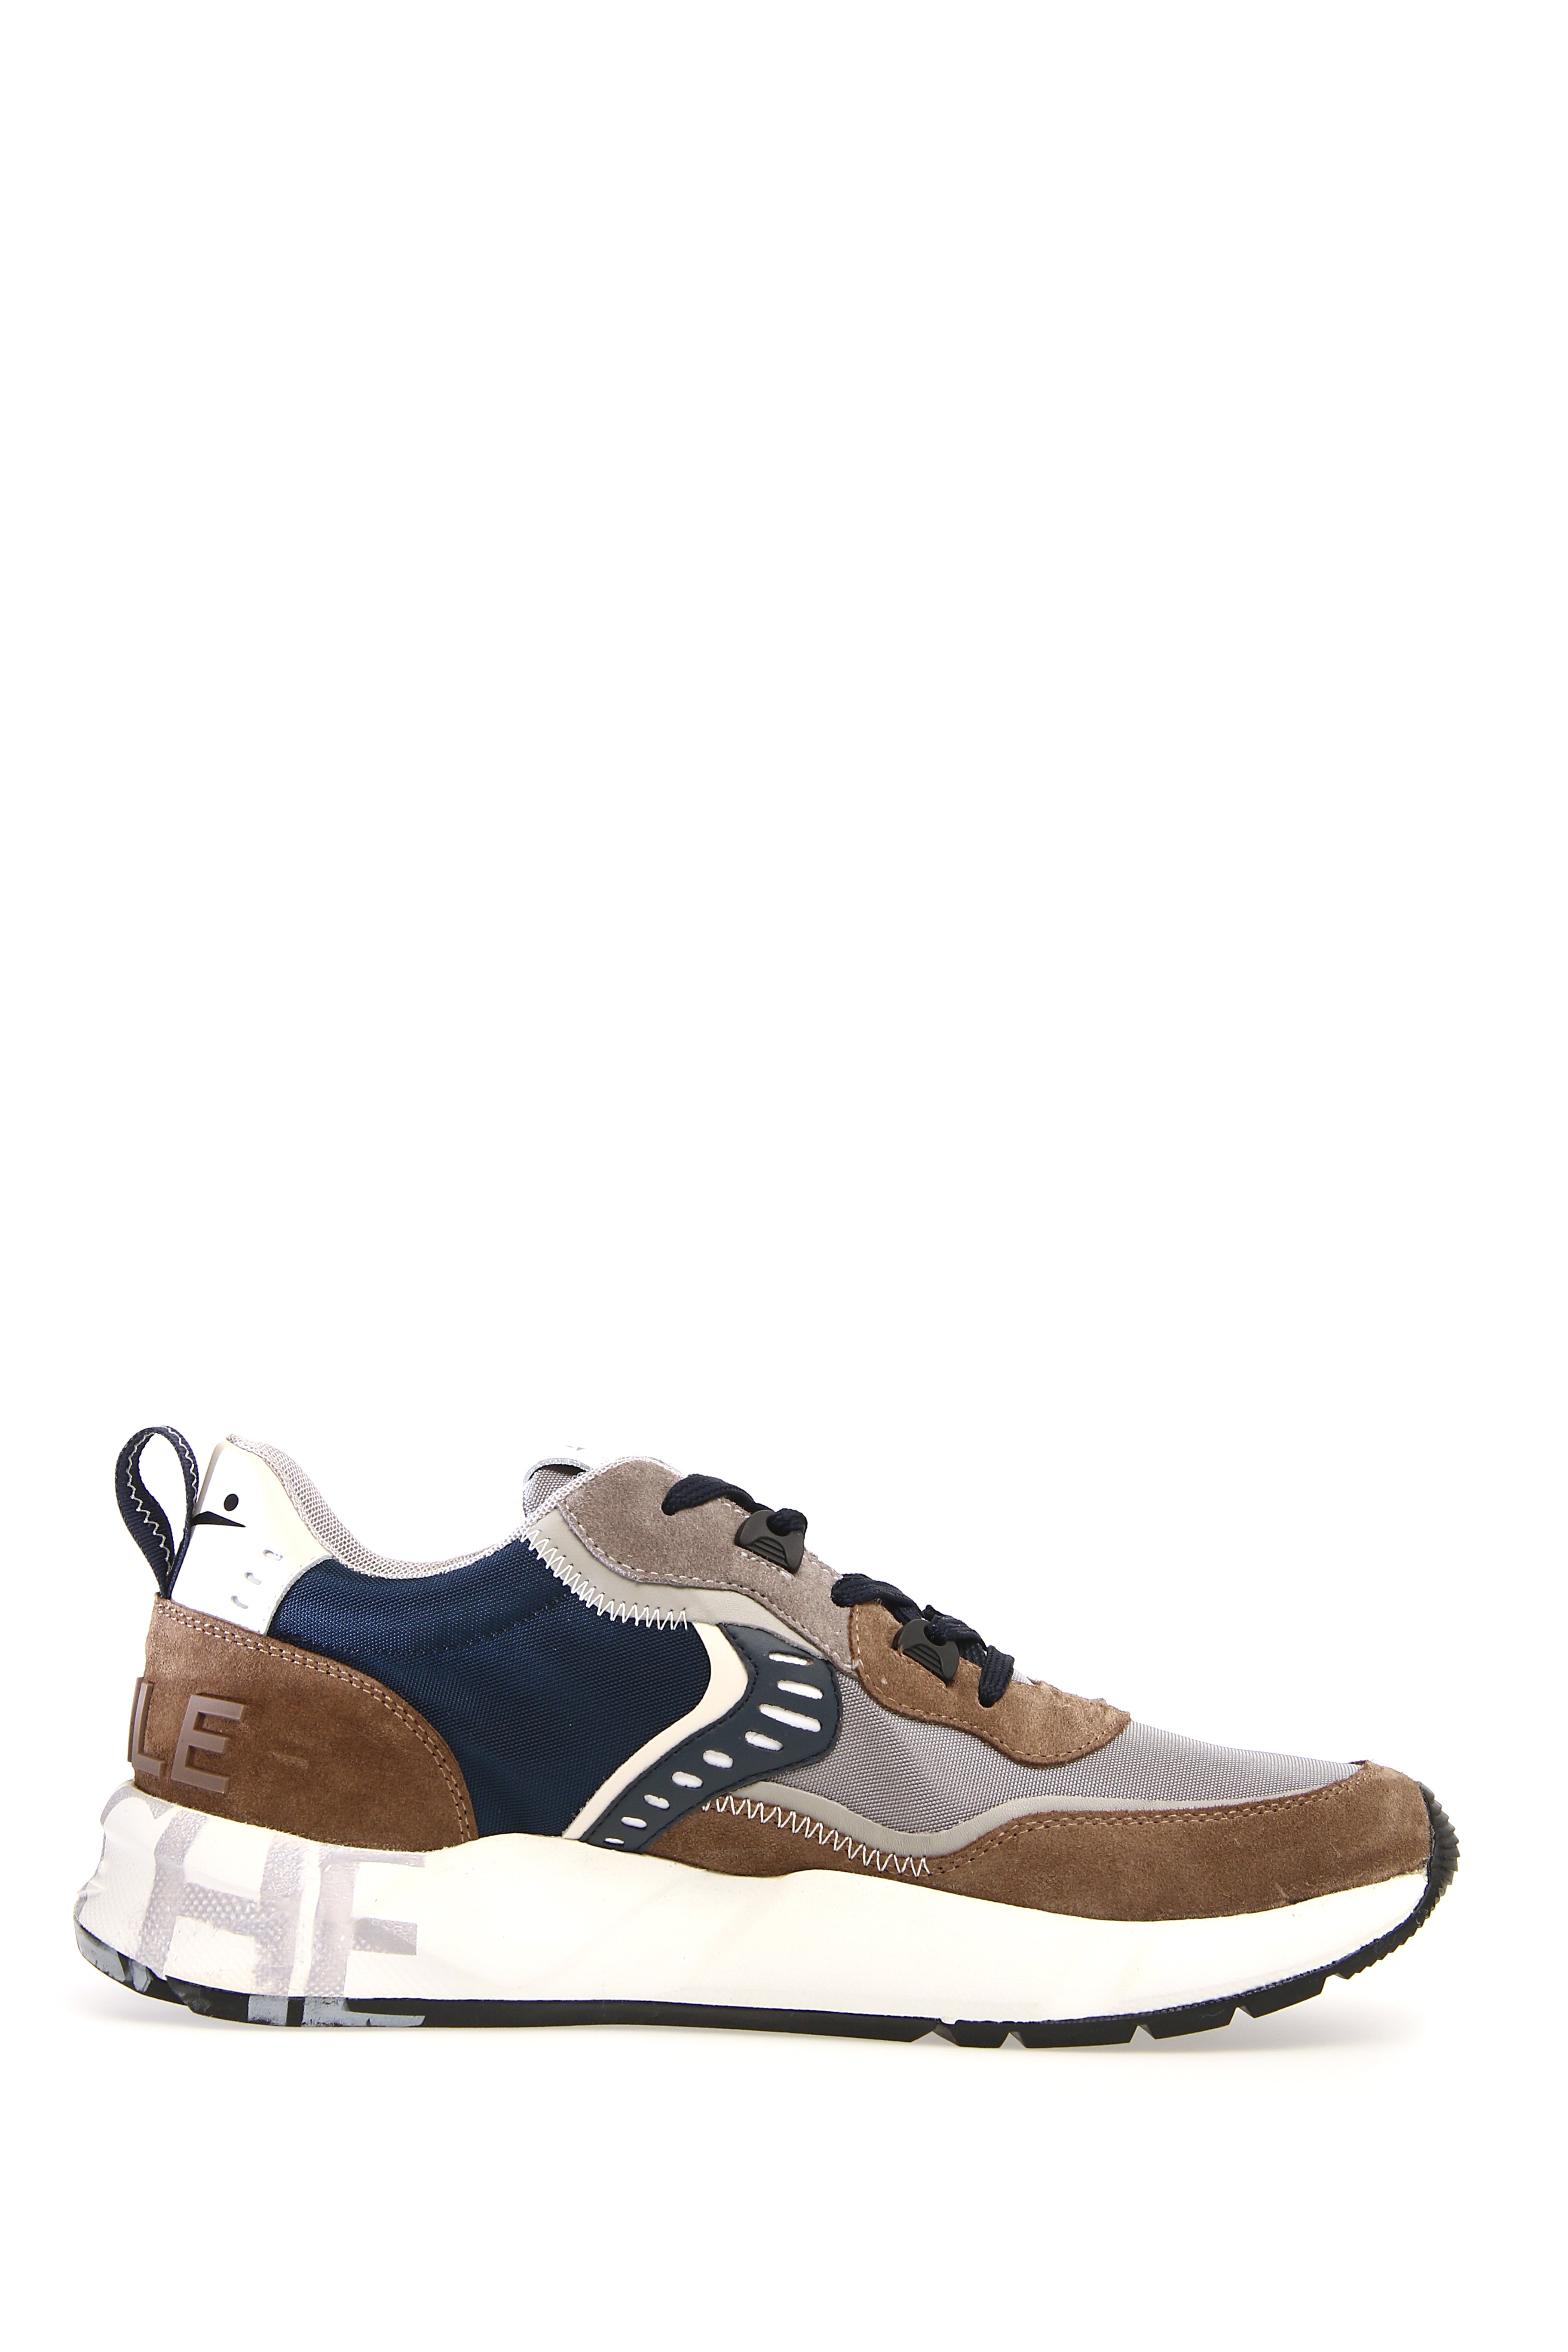 VOILE BLANCHE Sneakers Uomo 2017465 Blue